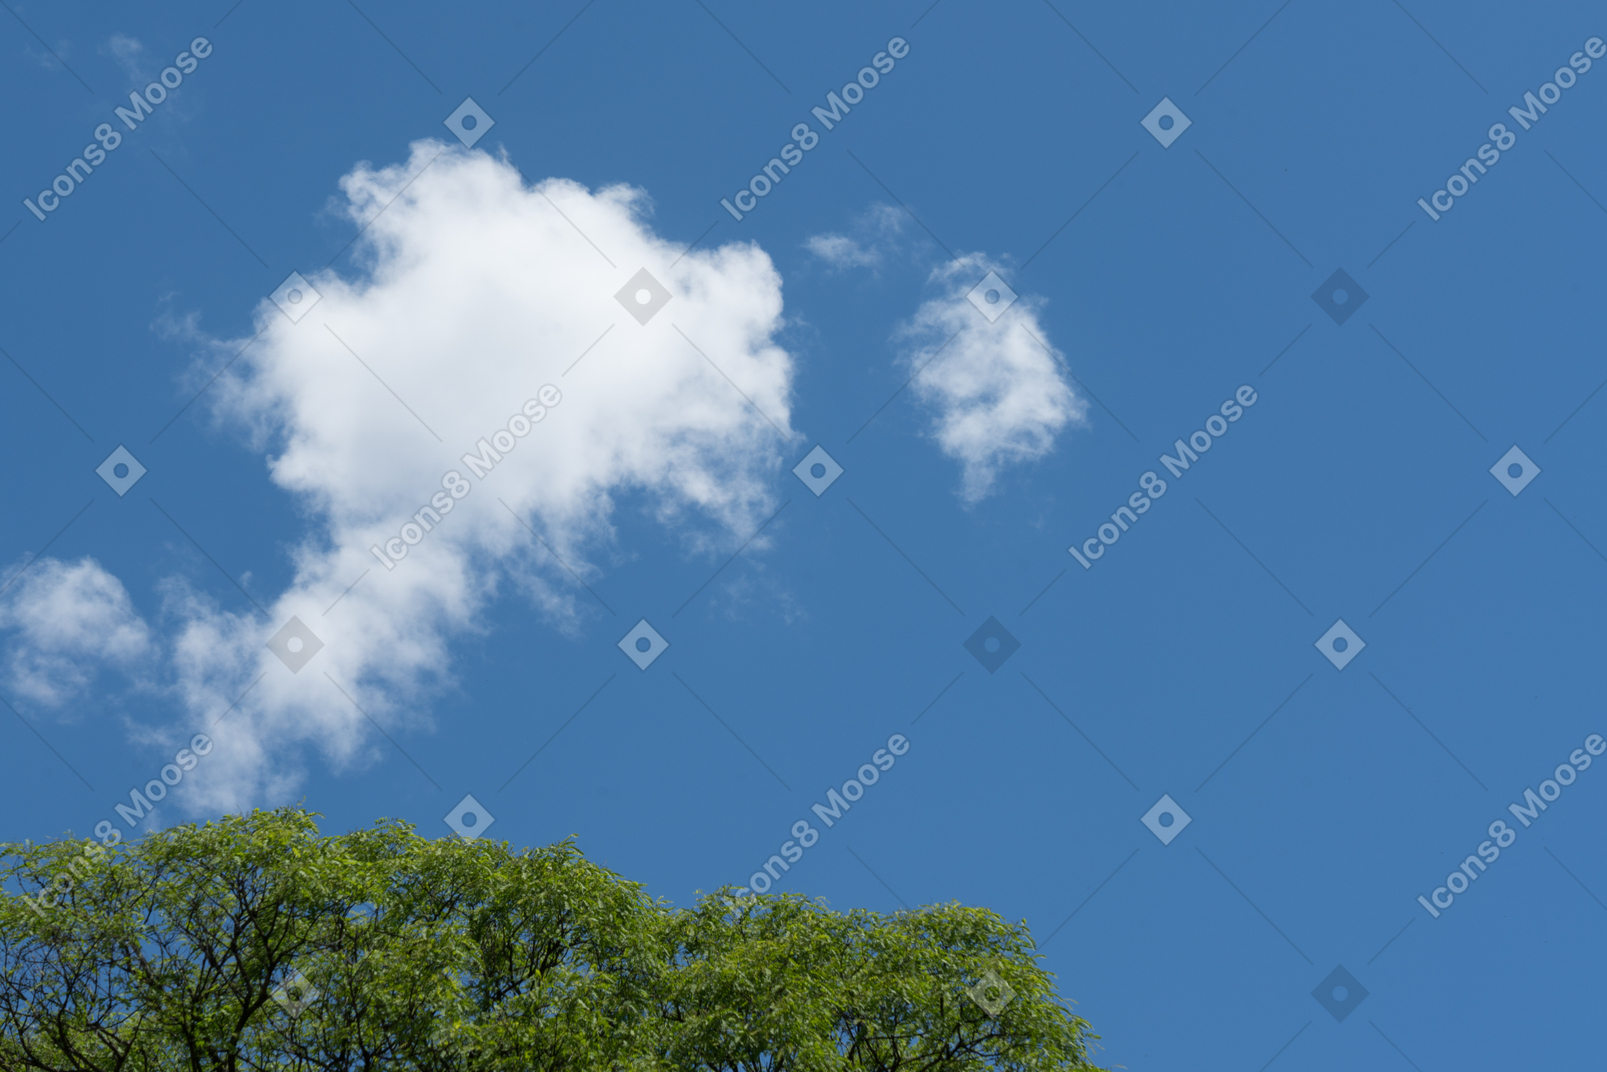 Blue sky with cloud and tree